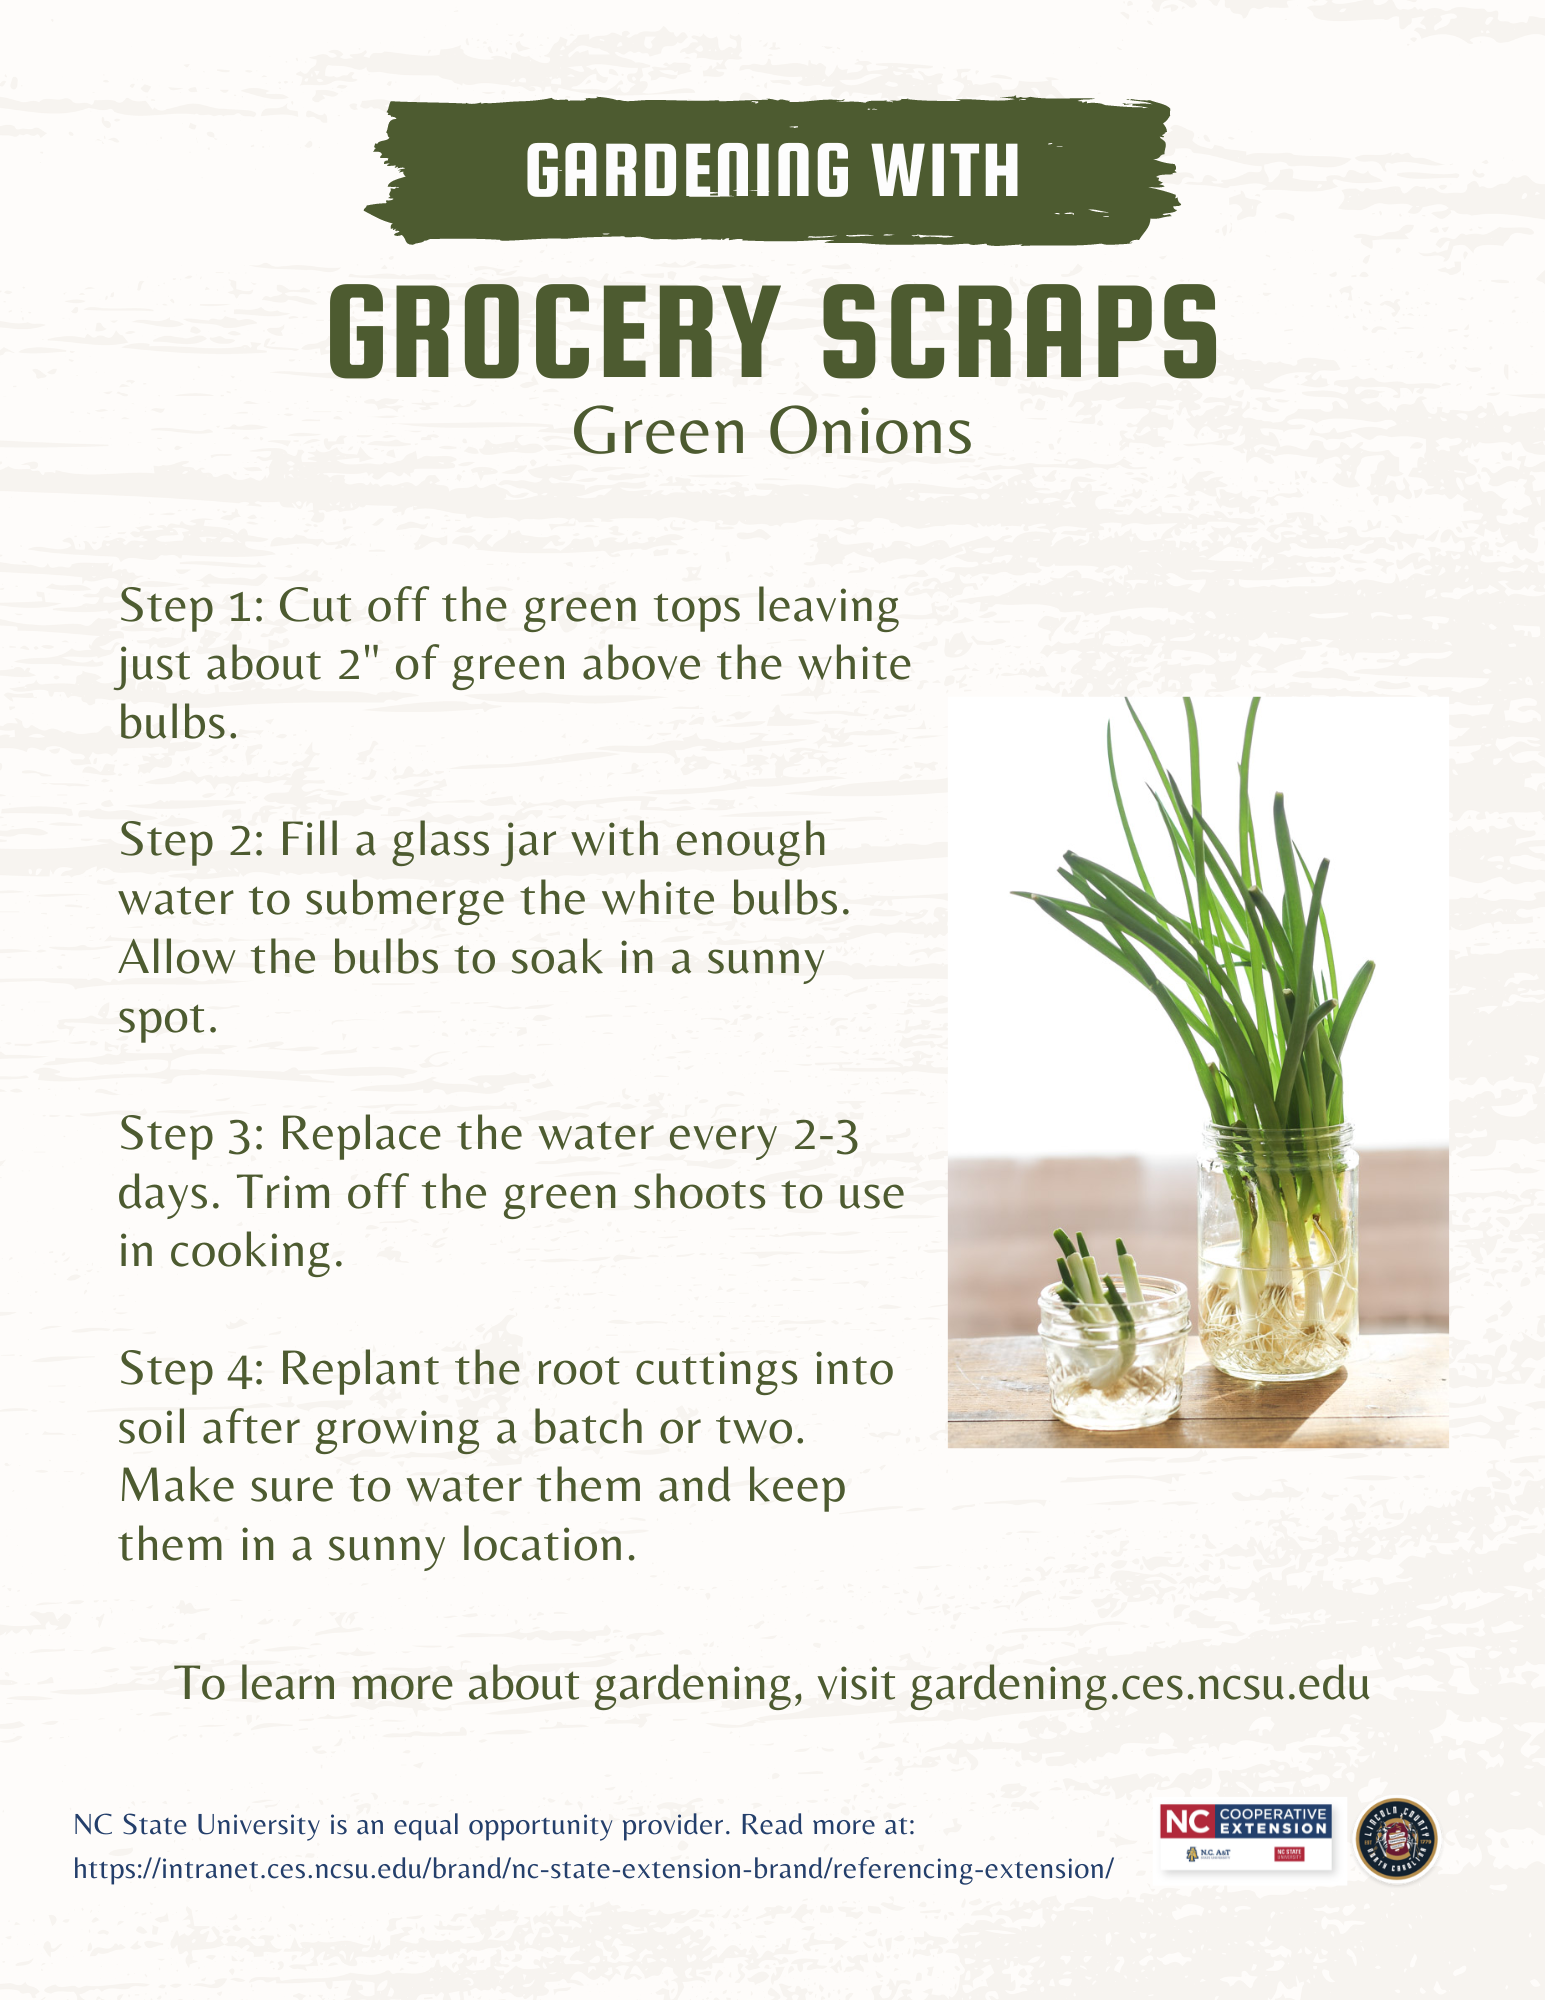 Save money and reduce waste by replanting grocery store green onions at home. 